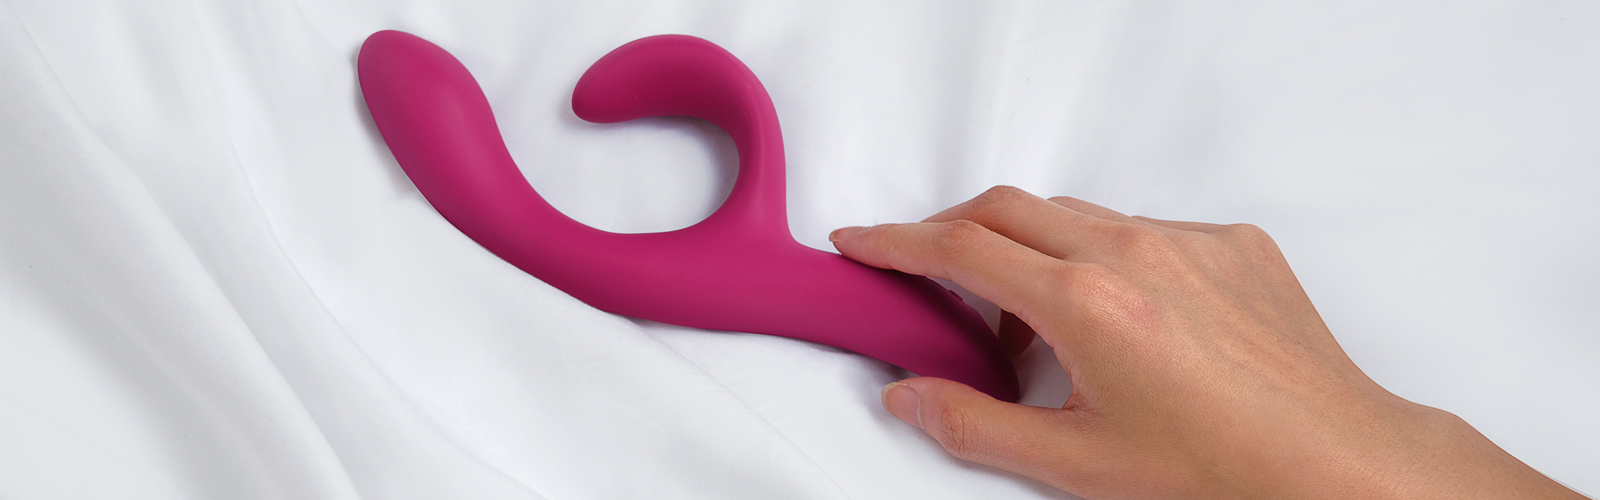 Holding a sex toy in bed